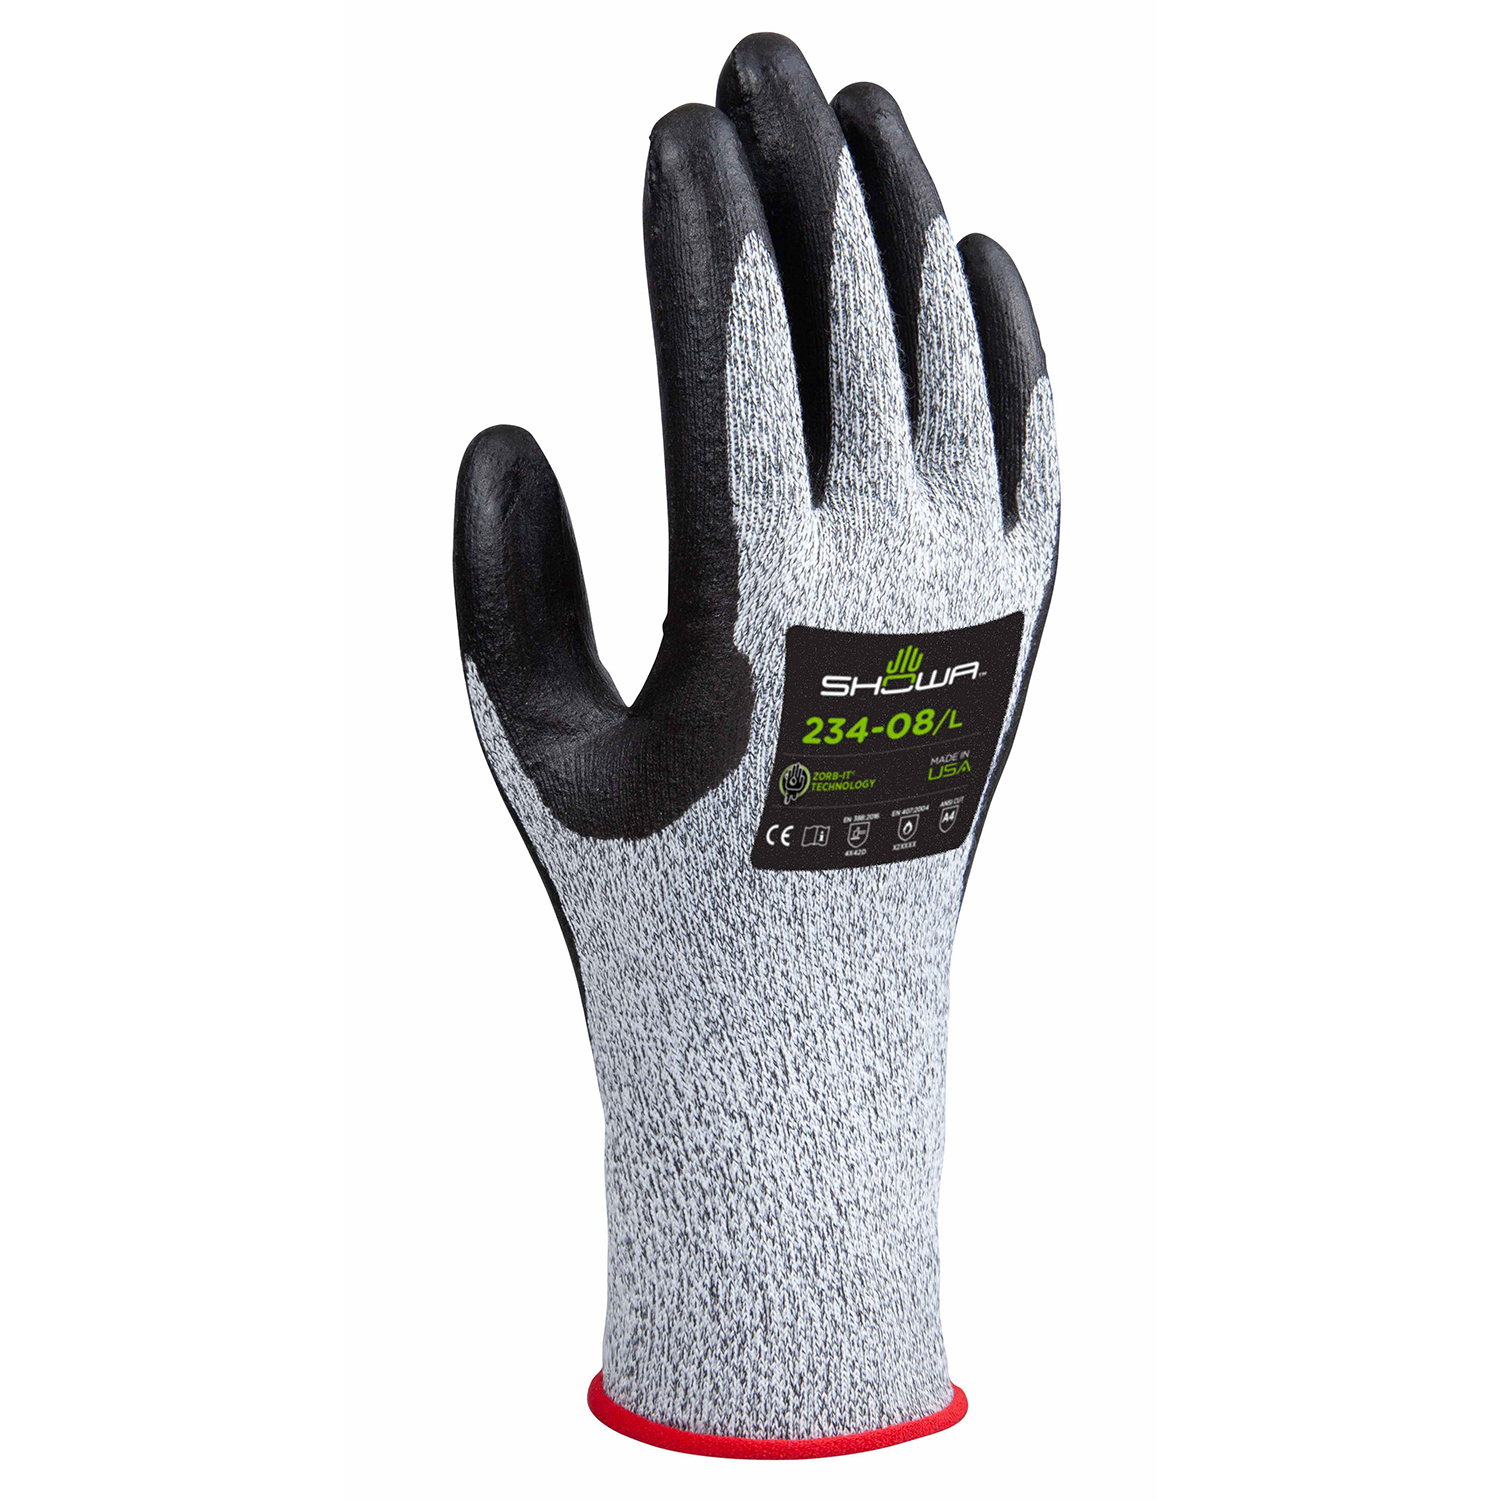 Foam nitrile palm, 15 gauge seamless spandex/engineered cut resistant liner reinforced w/HPPE,  black & white w/gray, ANSI CUT LEVEL A4/extra-extra large